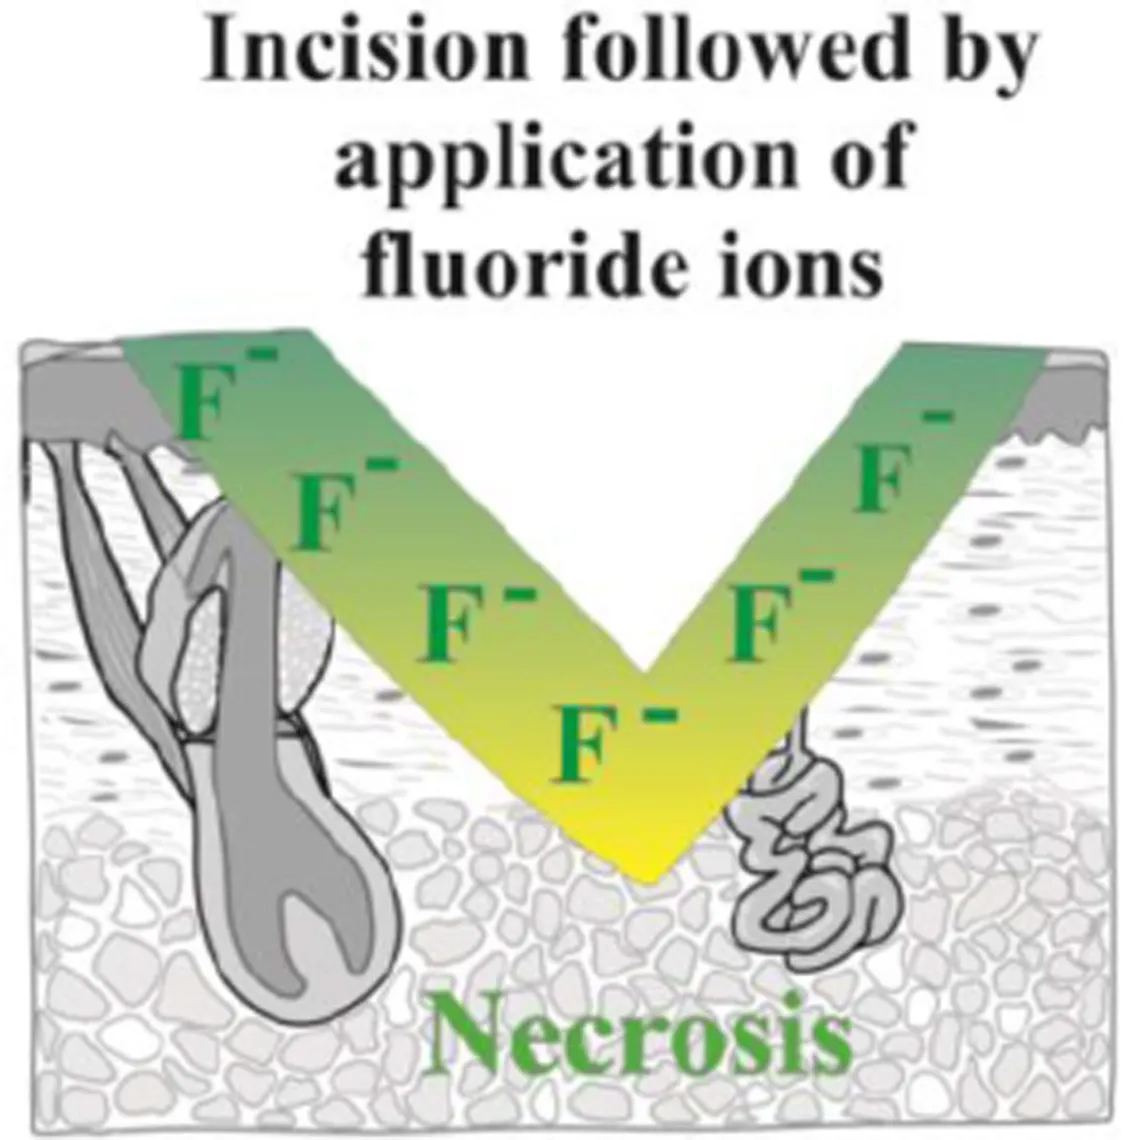 diagram showing the effects of an incision followed by fluoride ion application: necrosis